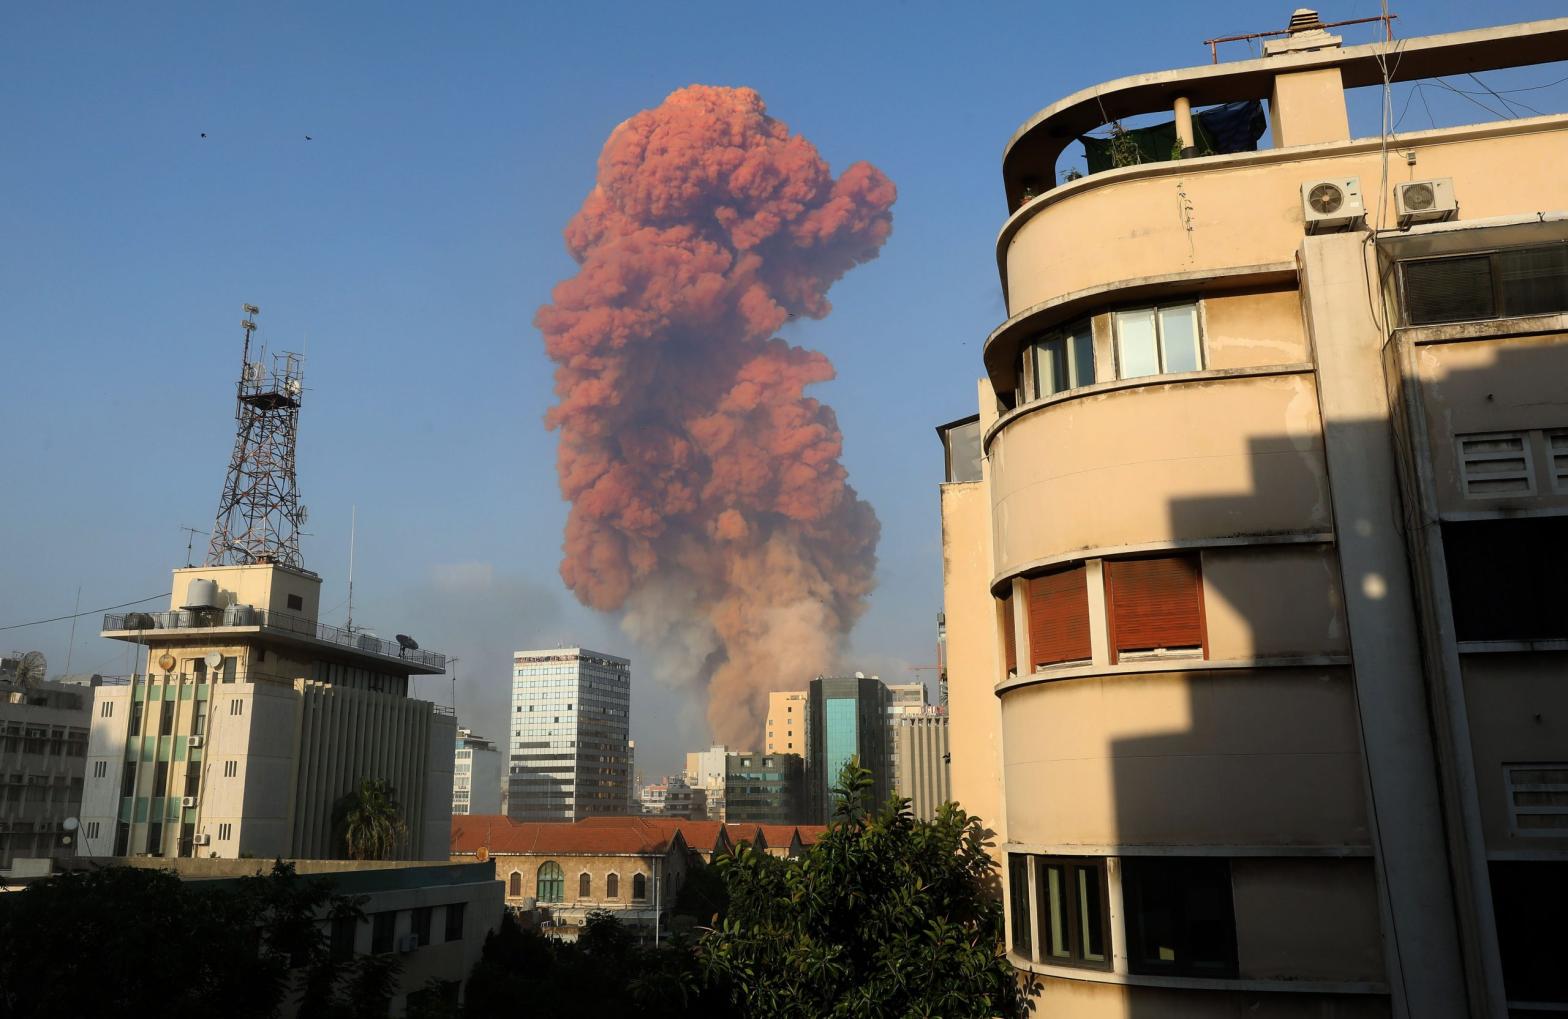 A picture taken on August 4, 2020 from the Hamra district in the centre of the Lebanese capital Beirut shows a smoke plume rising following a huge explosion that rocked the Port of Beirut. (Photo: Anwar Amro / AFP, Getty Images)